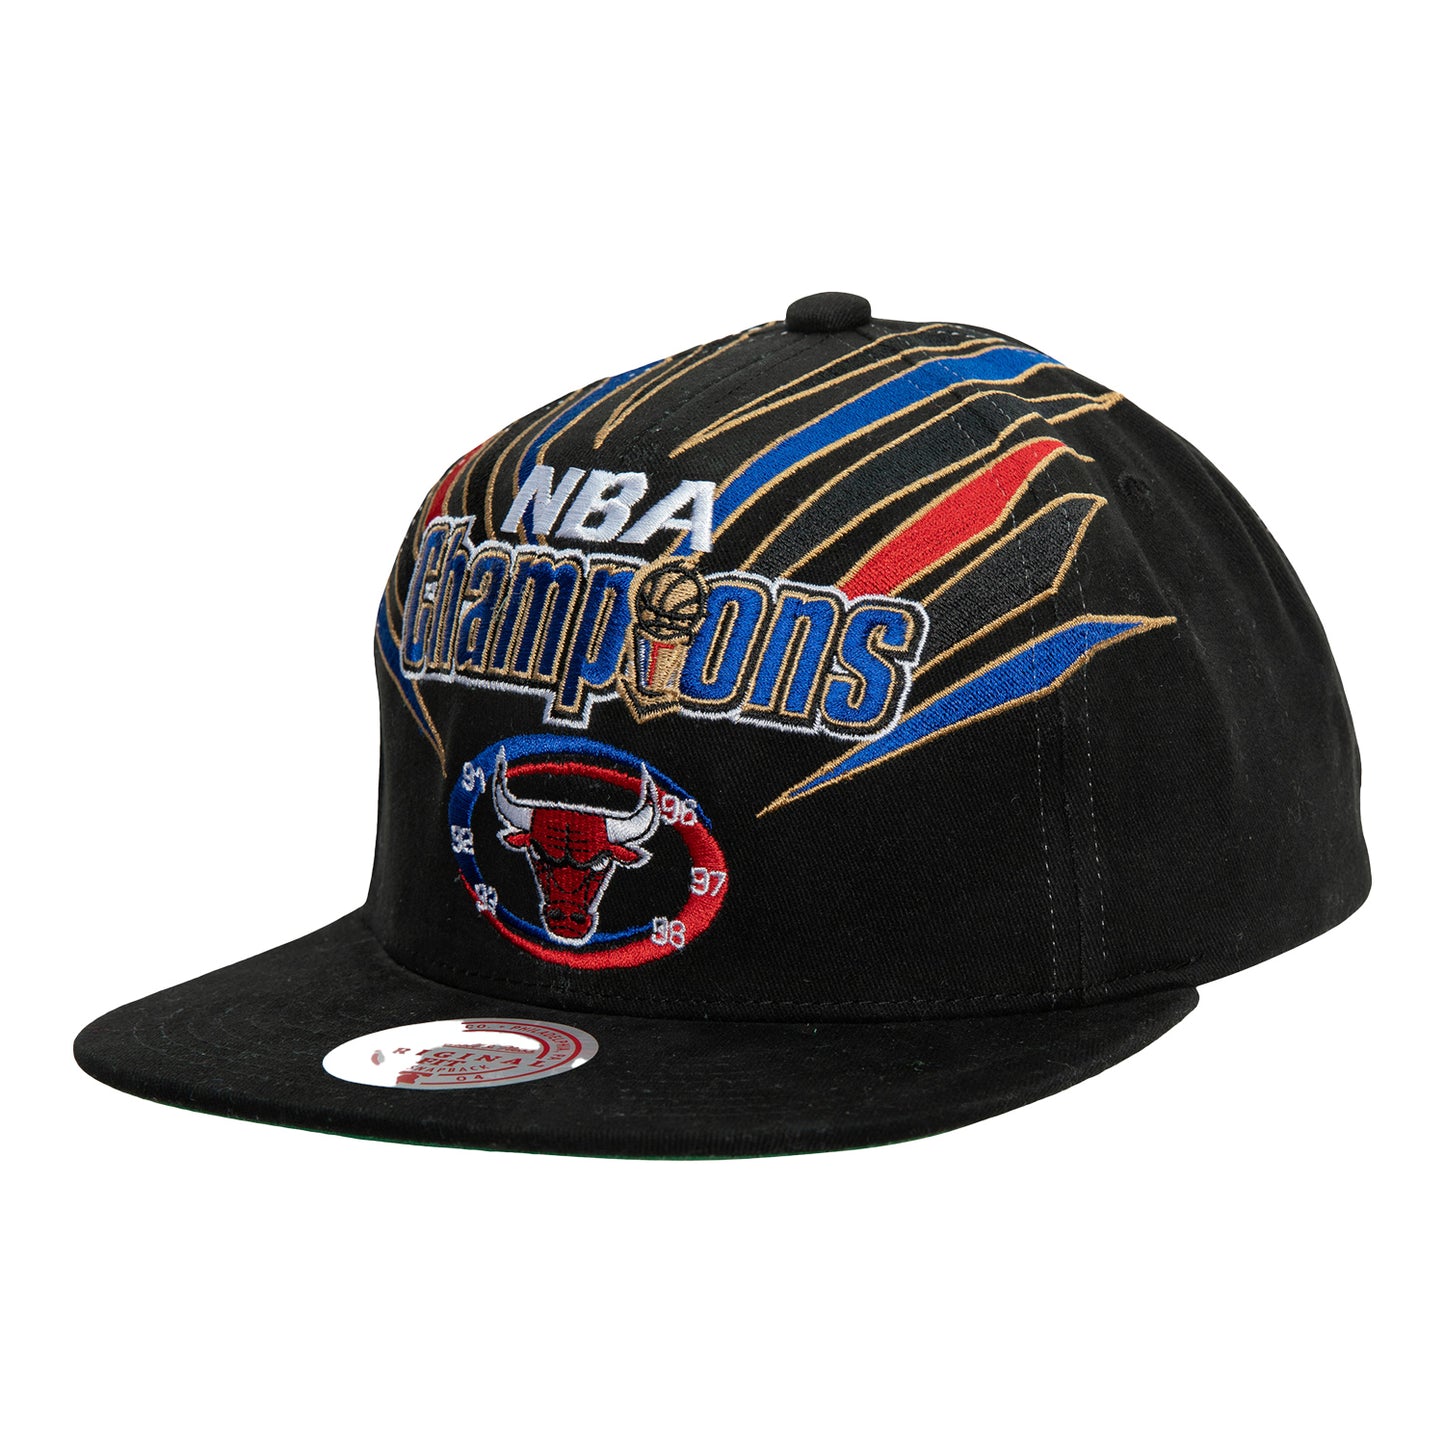 Chicago Bulls '98 Champs M&N Snapback in black - front view